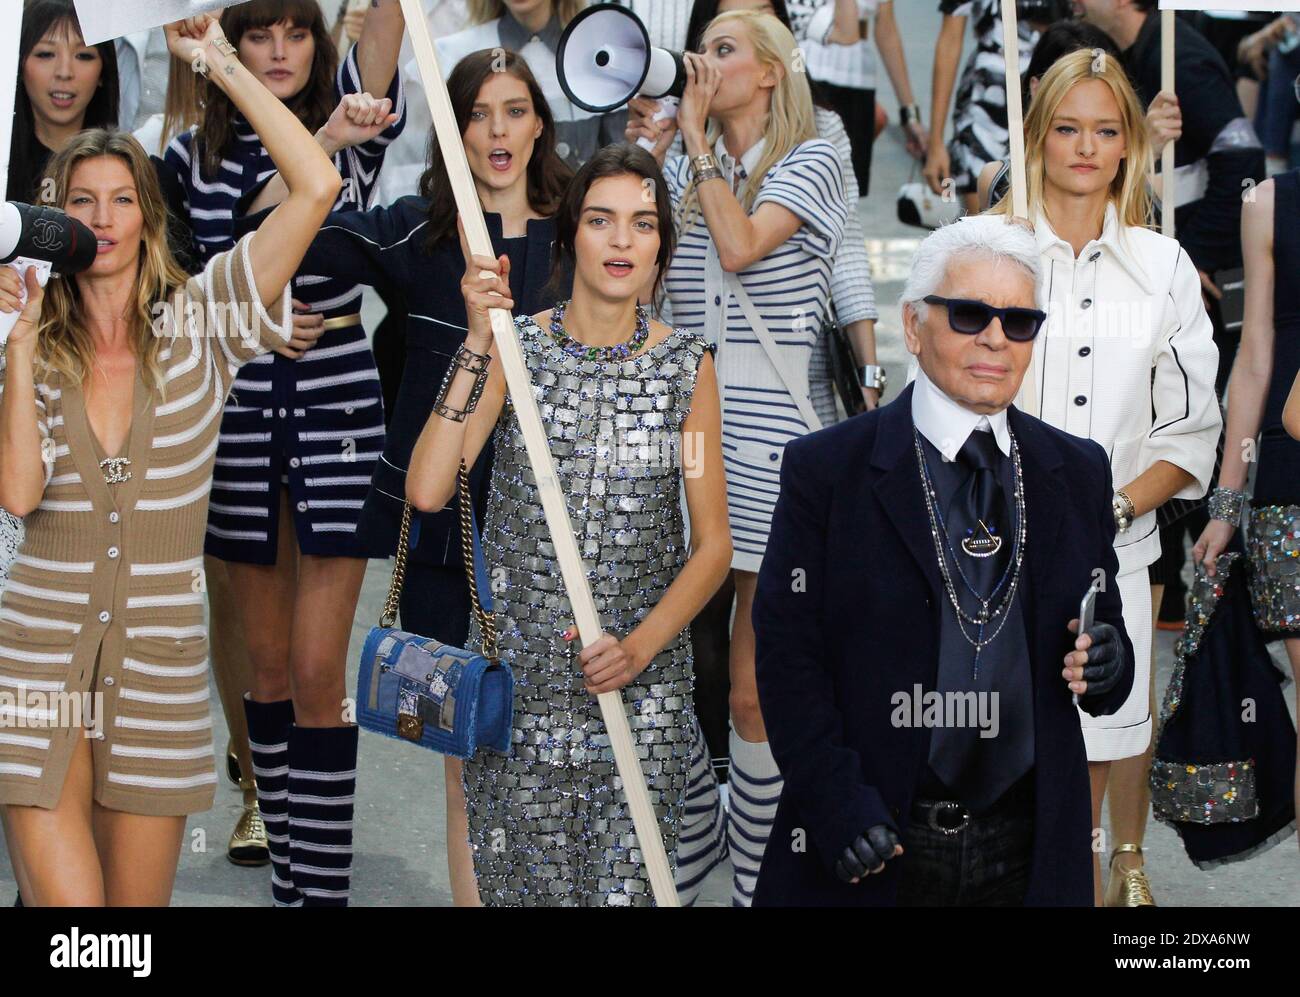 Gisele Bundchen, Karl Lagerfeld and models walk the runway during the Chanel  show as part of the Paris Fashion Week Womenswear Spring/Summer 2015 at the  Grand Palais in Paris, France on September